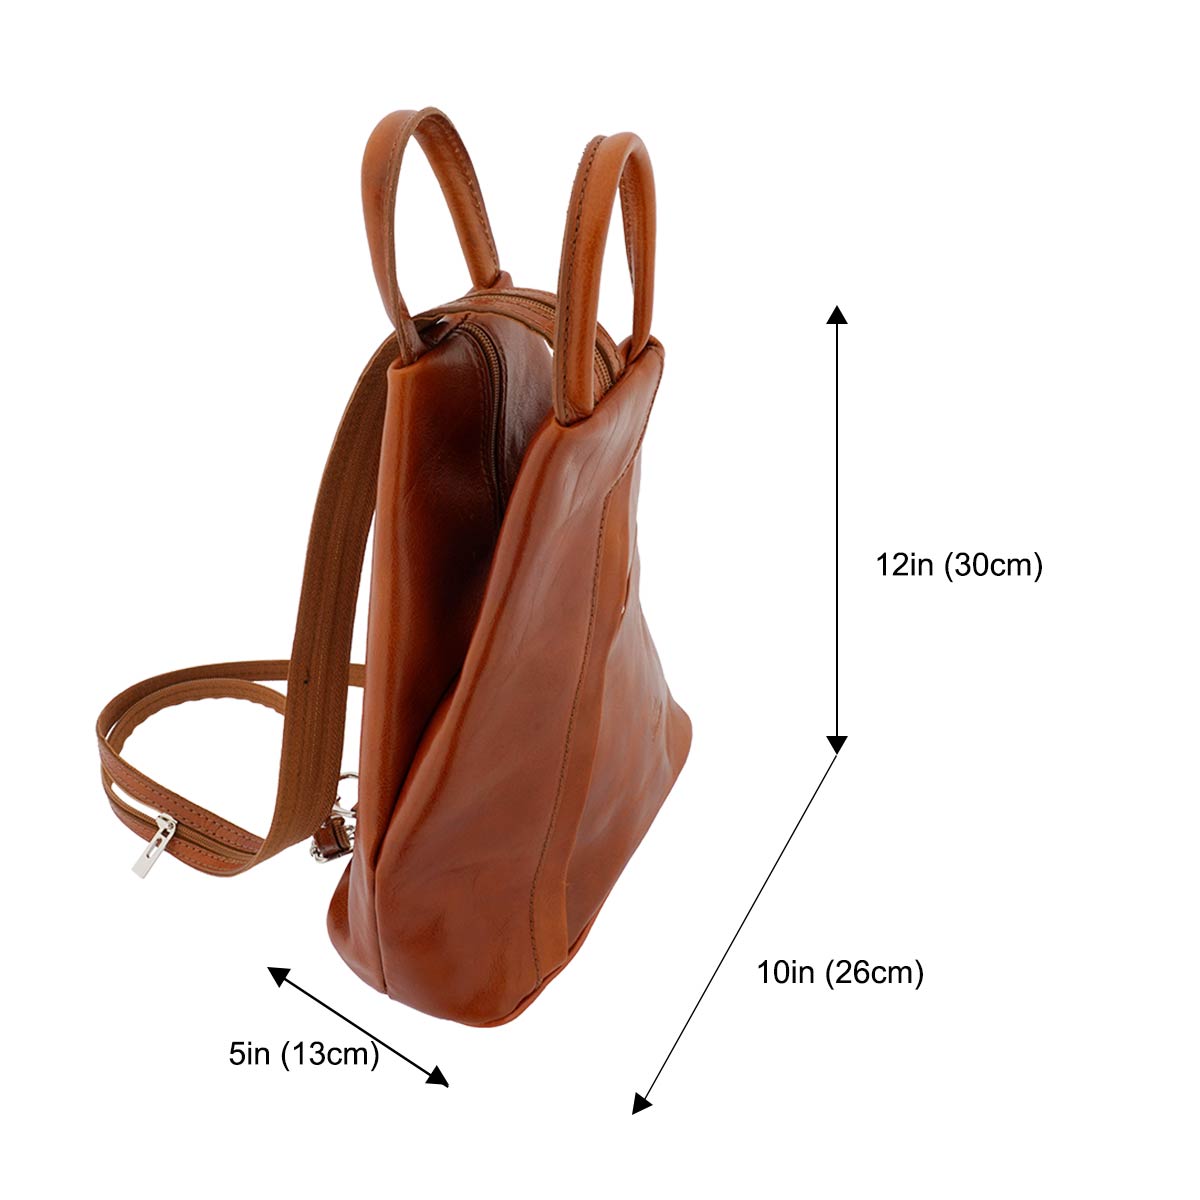 18 inch Leather Laptop Backpack -Tan - MZRLC093T